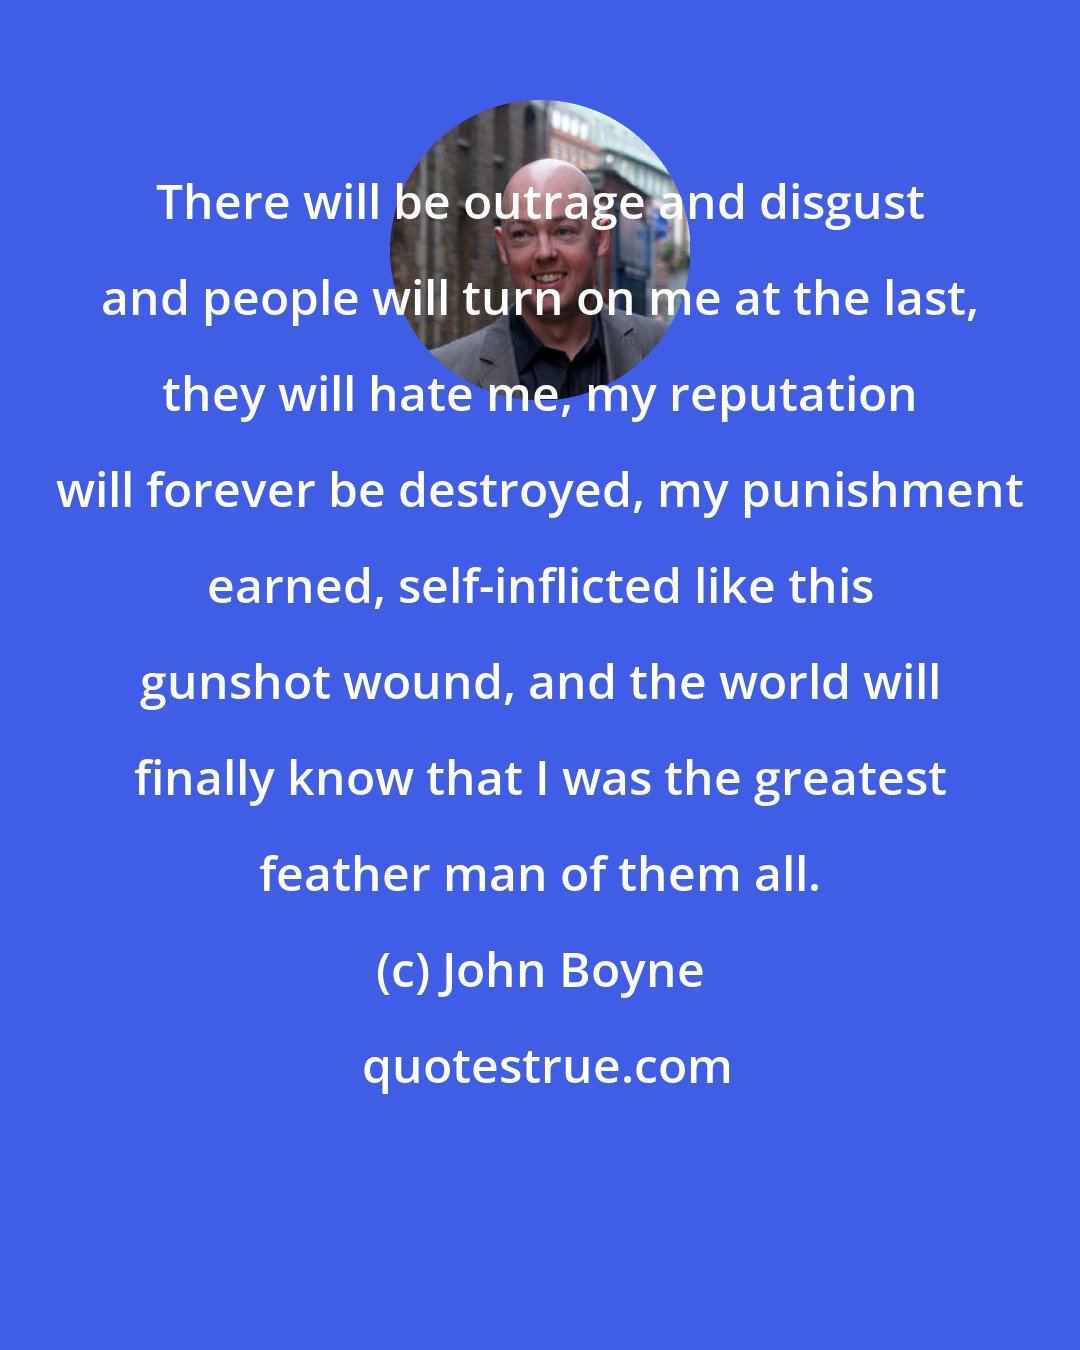 John Boyne: There will be outrage and disgust and people will turn on me at the last, they will hate me, my reputation will forever be destroyed, my punishment earned, self-inflicted like this gunshot wound, and the world will finally know that I was the greatest feather man of them all.